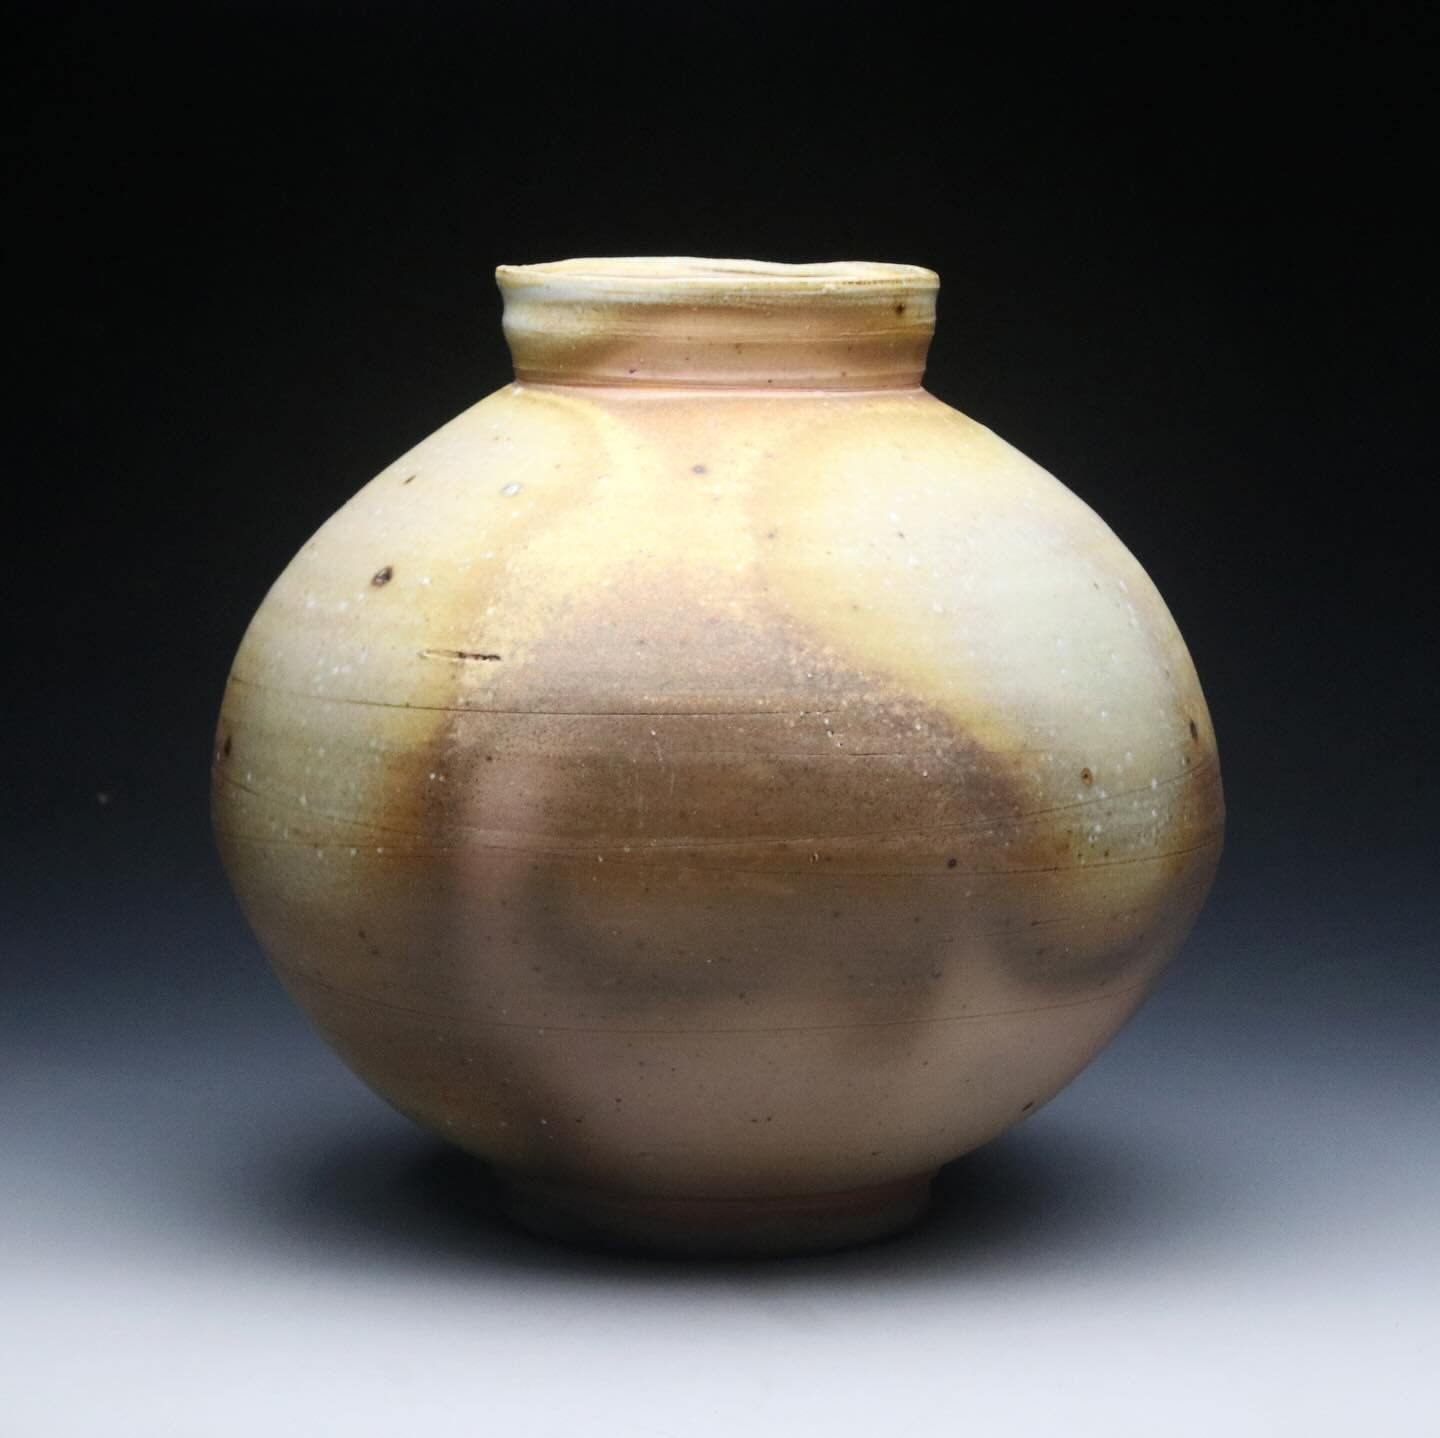 My Mother&rsquo;s Day sale is live now! Treat yourself! Or your mum! This moon jar is one of the pots that is available. 

This pot was fired in the Pleasant Hill anagama for 108 hours. And 8 minutes. I love the subtle stone like surface of it. It is